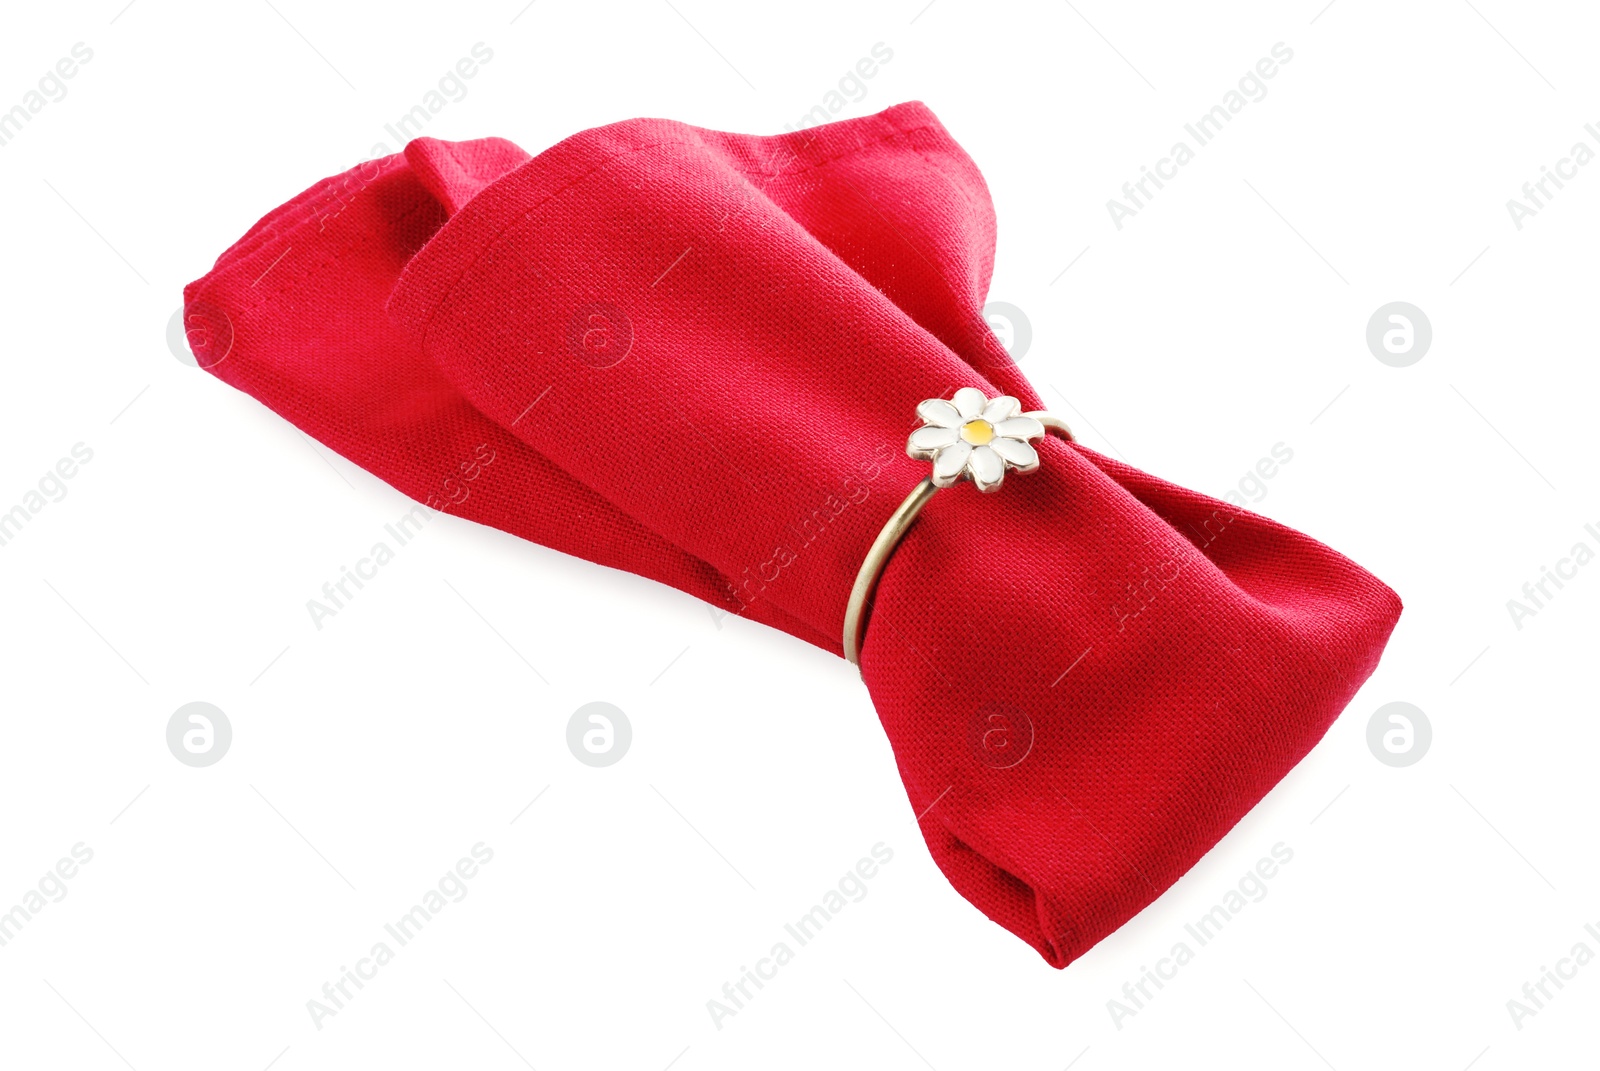 Photo of Napkin with decorative ring for table setting isolated on white